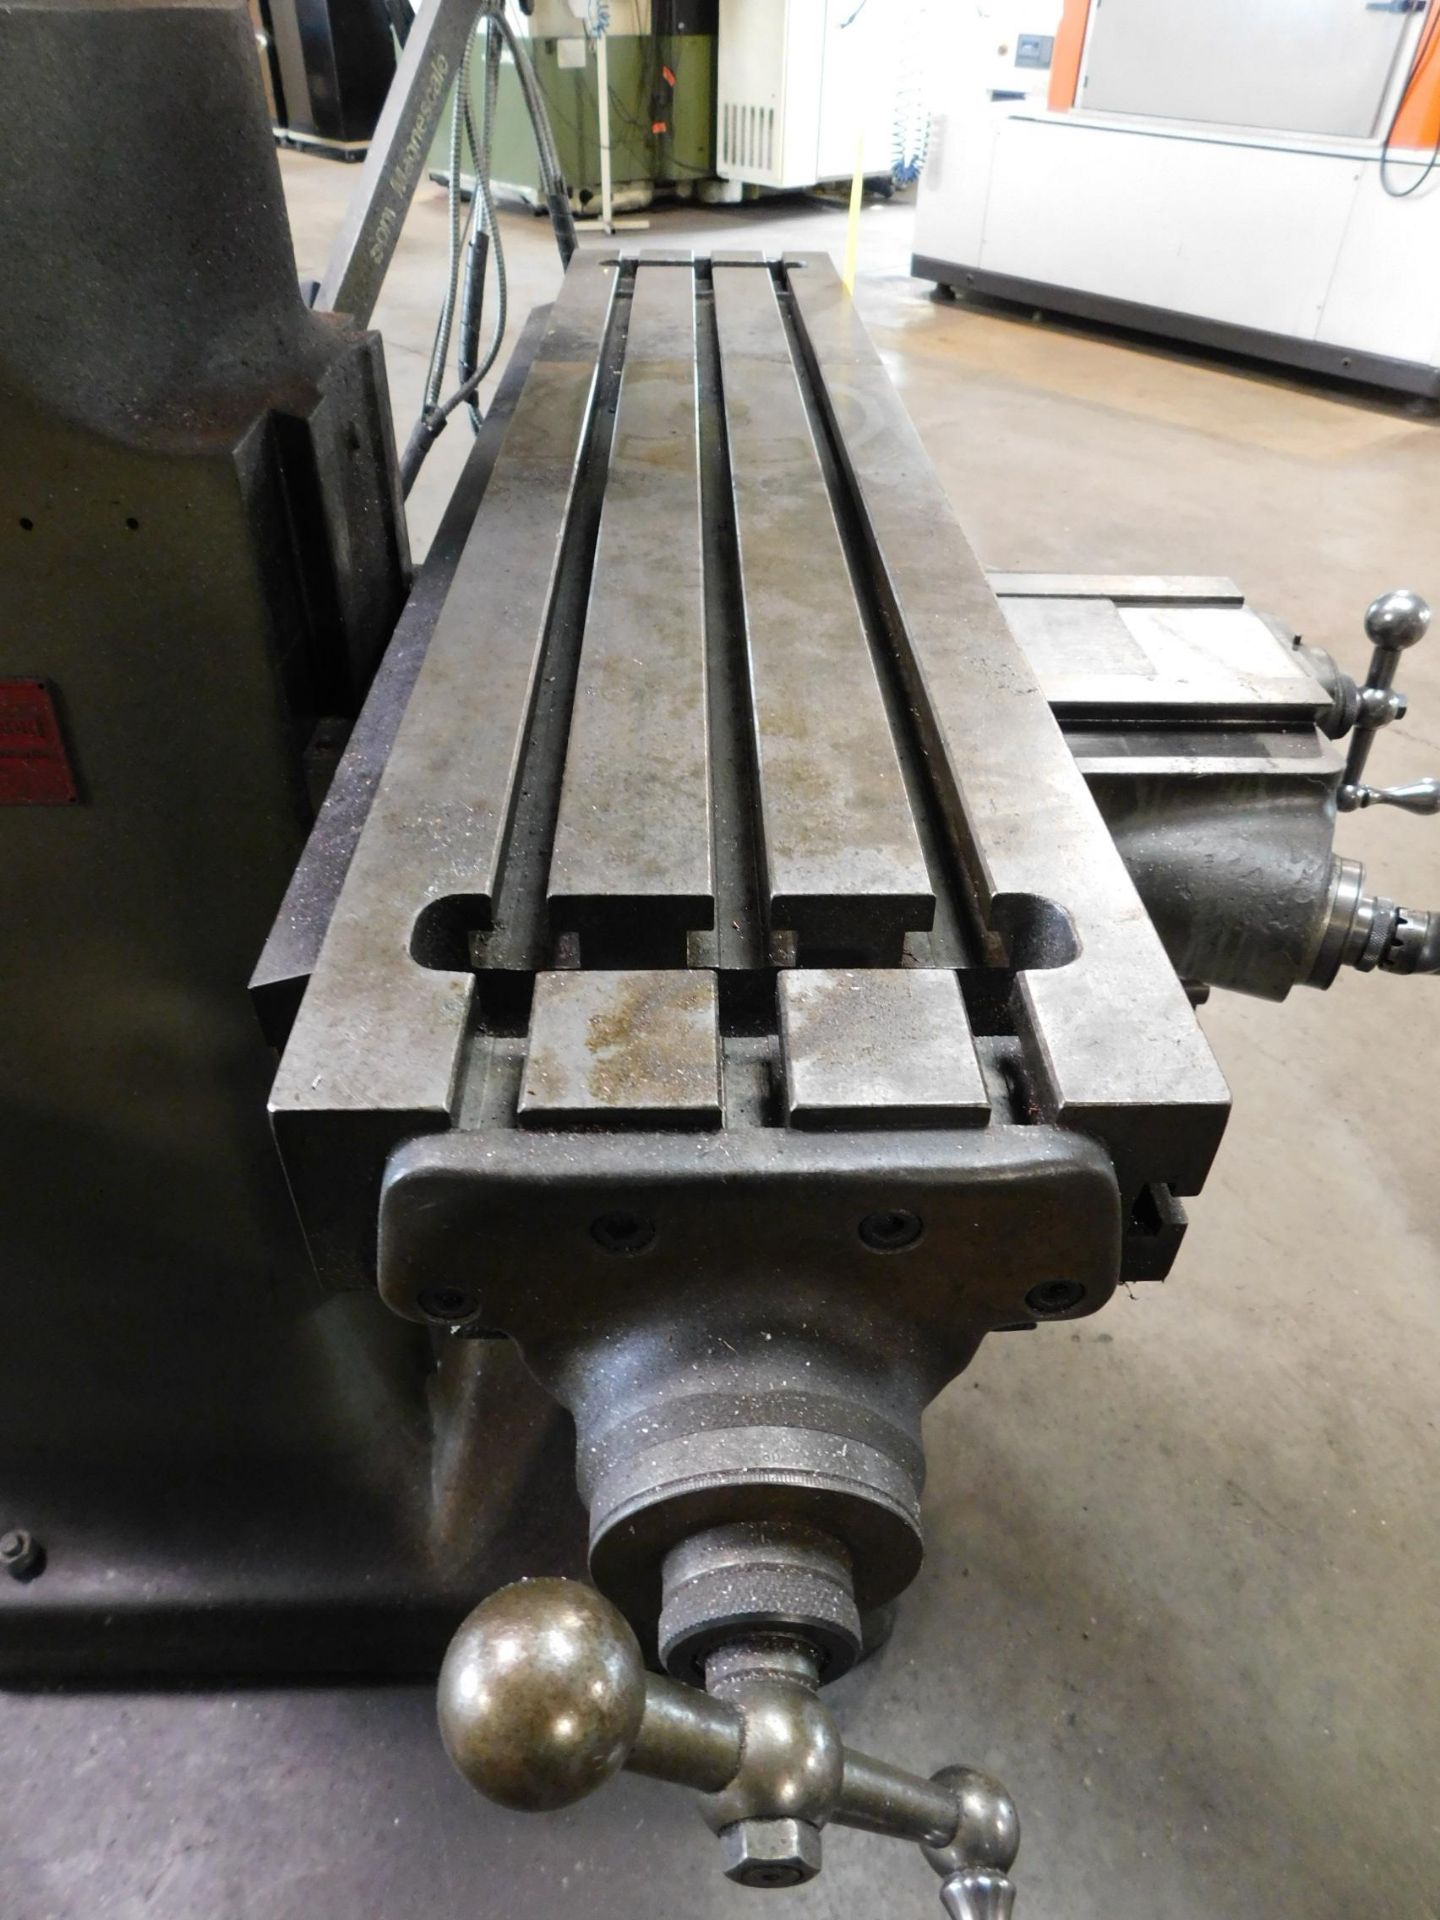 Bridgeport 1H.P. Step Pulley Vertical Mill sn#12BR139963, 9"X42" Table, R-8 Collets, Sony 2-Axis - Image 9 of 12